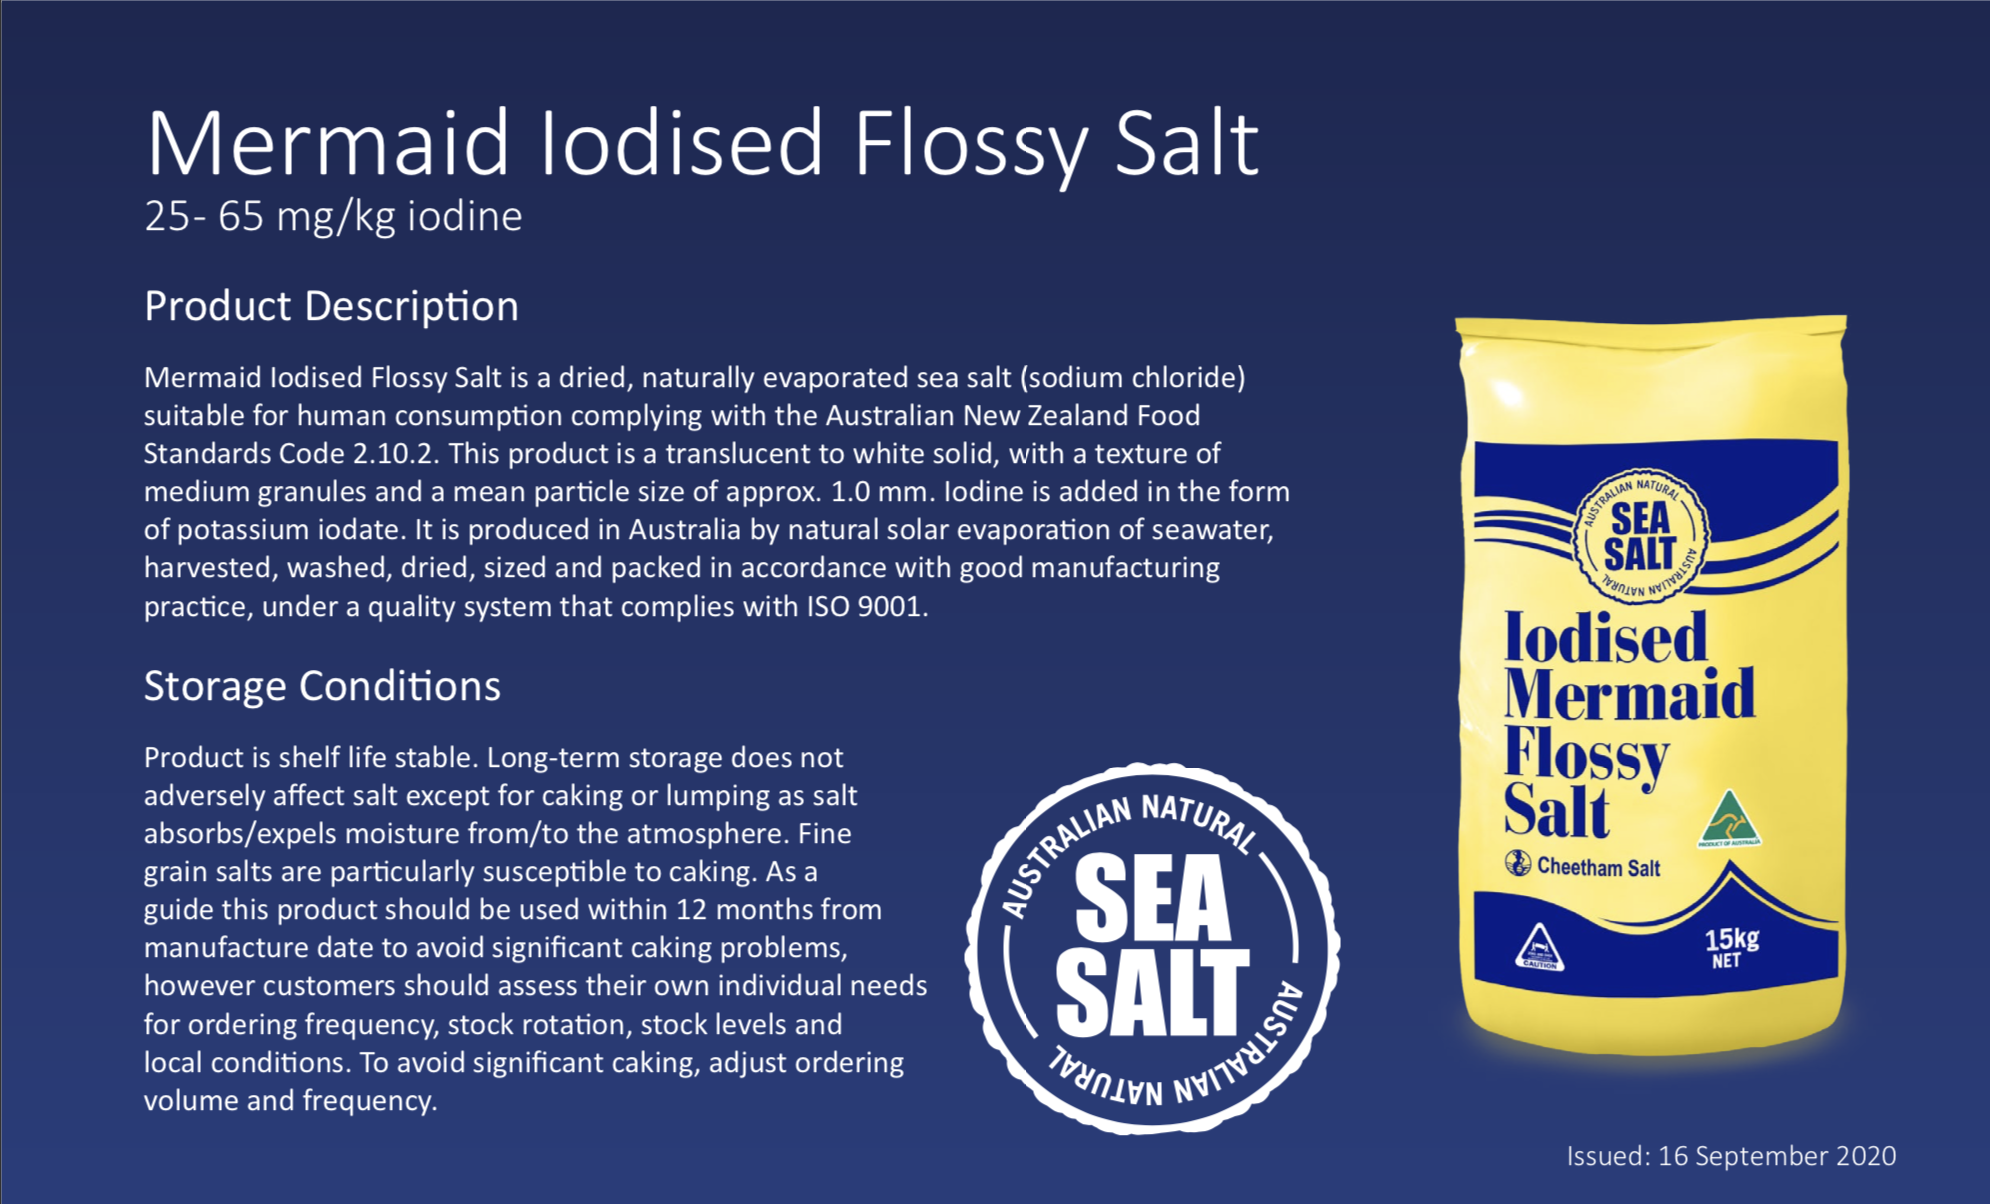 An image of Mermaid Iodised Flossy Salt product description and storage conditions